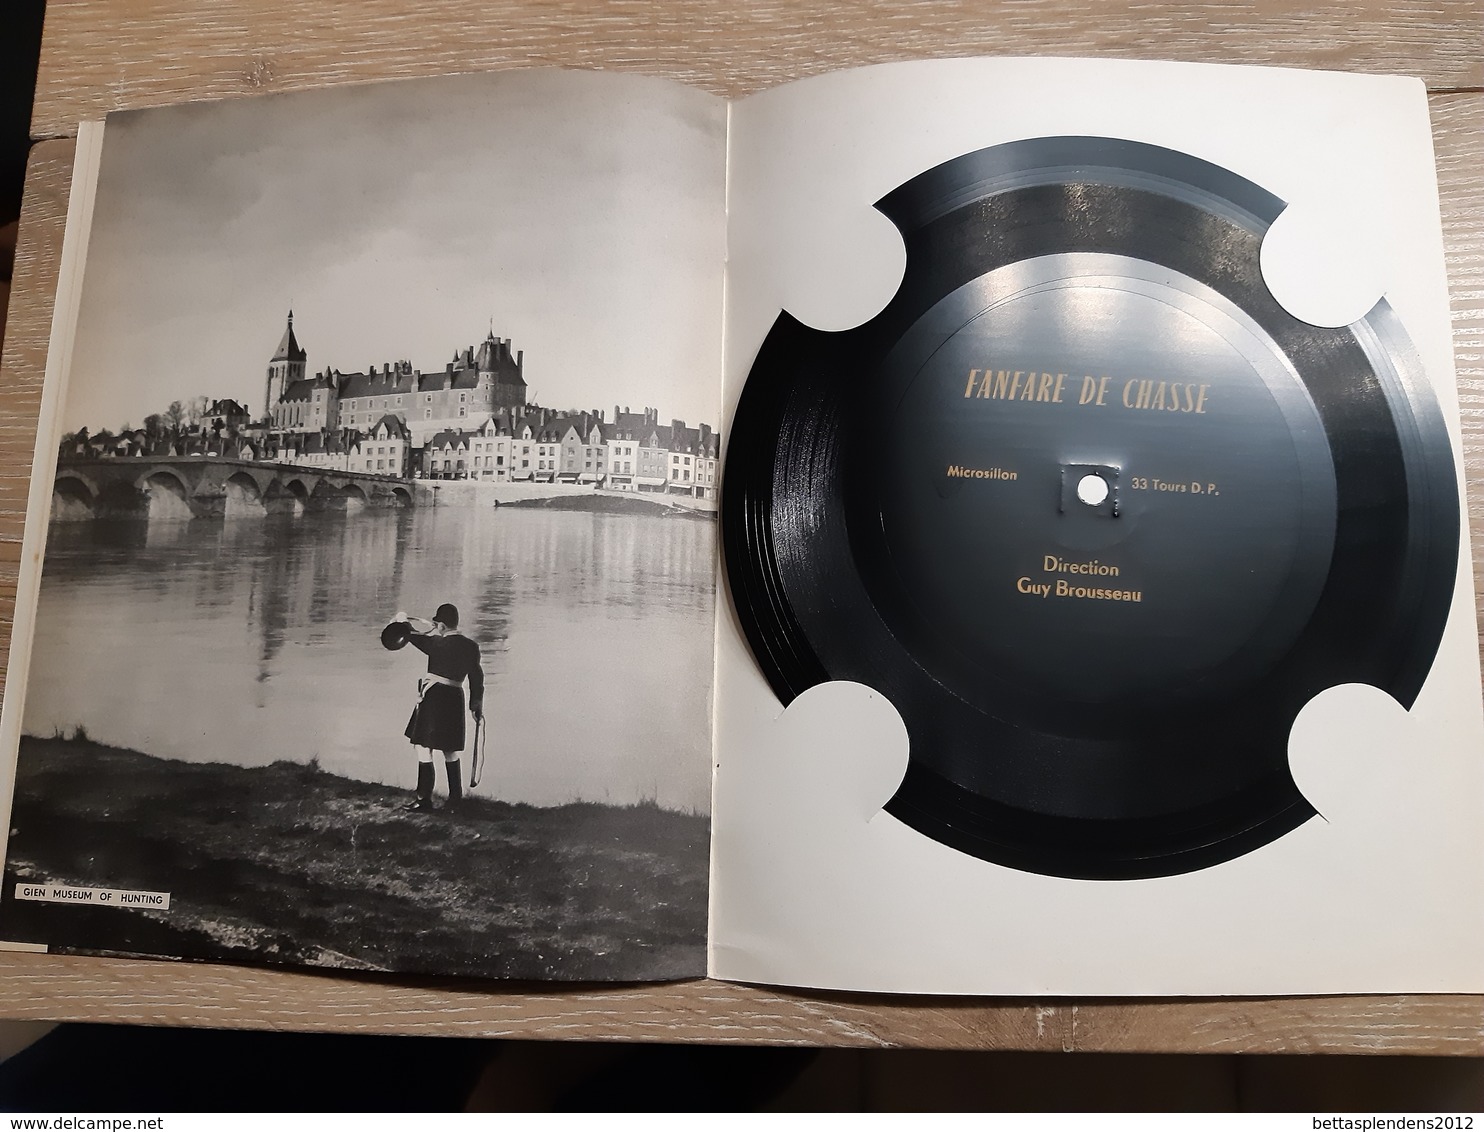 CHASSE - CHAMBORD HUNT CLUB - HUNTING IN FRANCE - COMPLET 12 PAGES ET DISQUE MOU "Fanfare De Chasse" - Andere & Zonder Classificatie